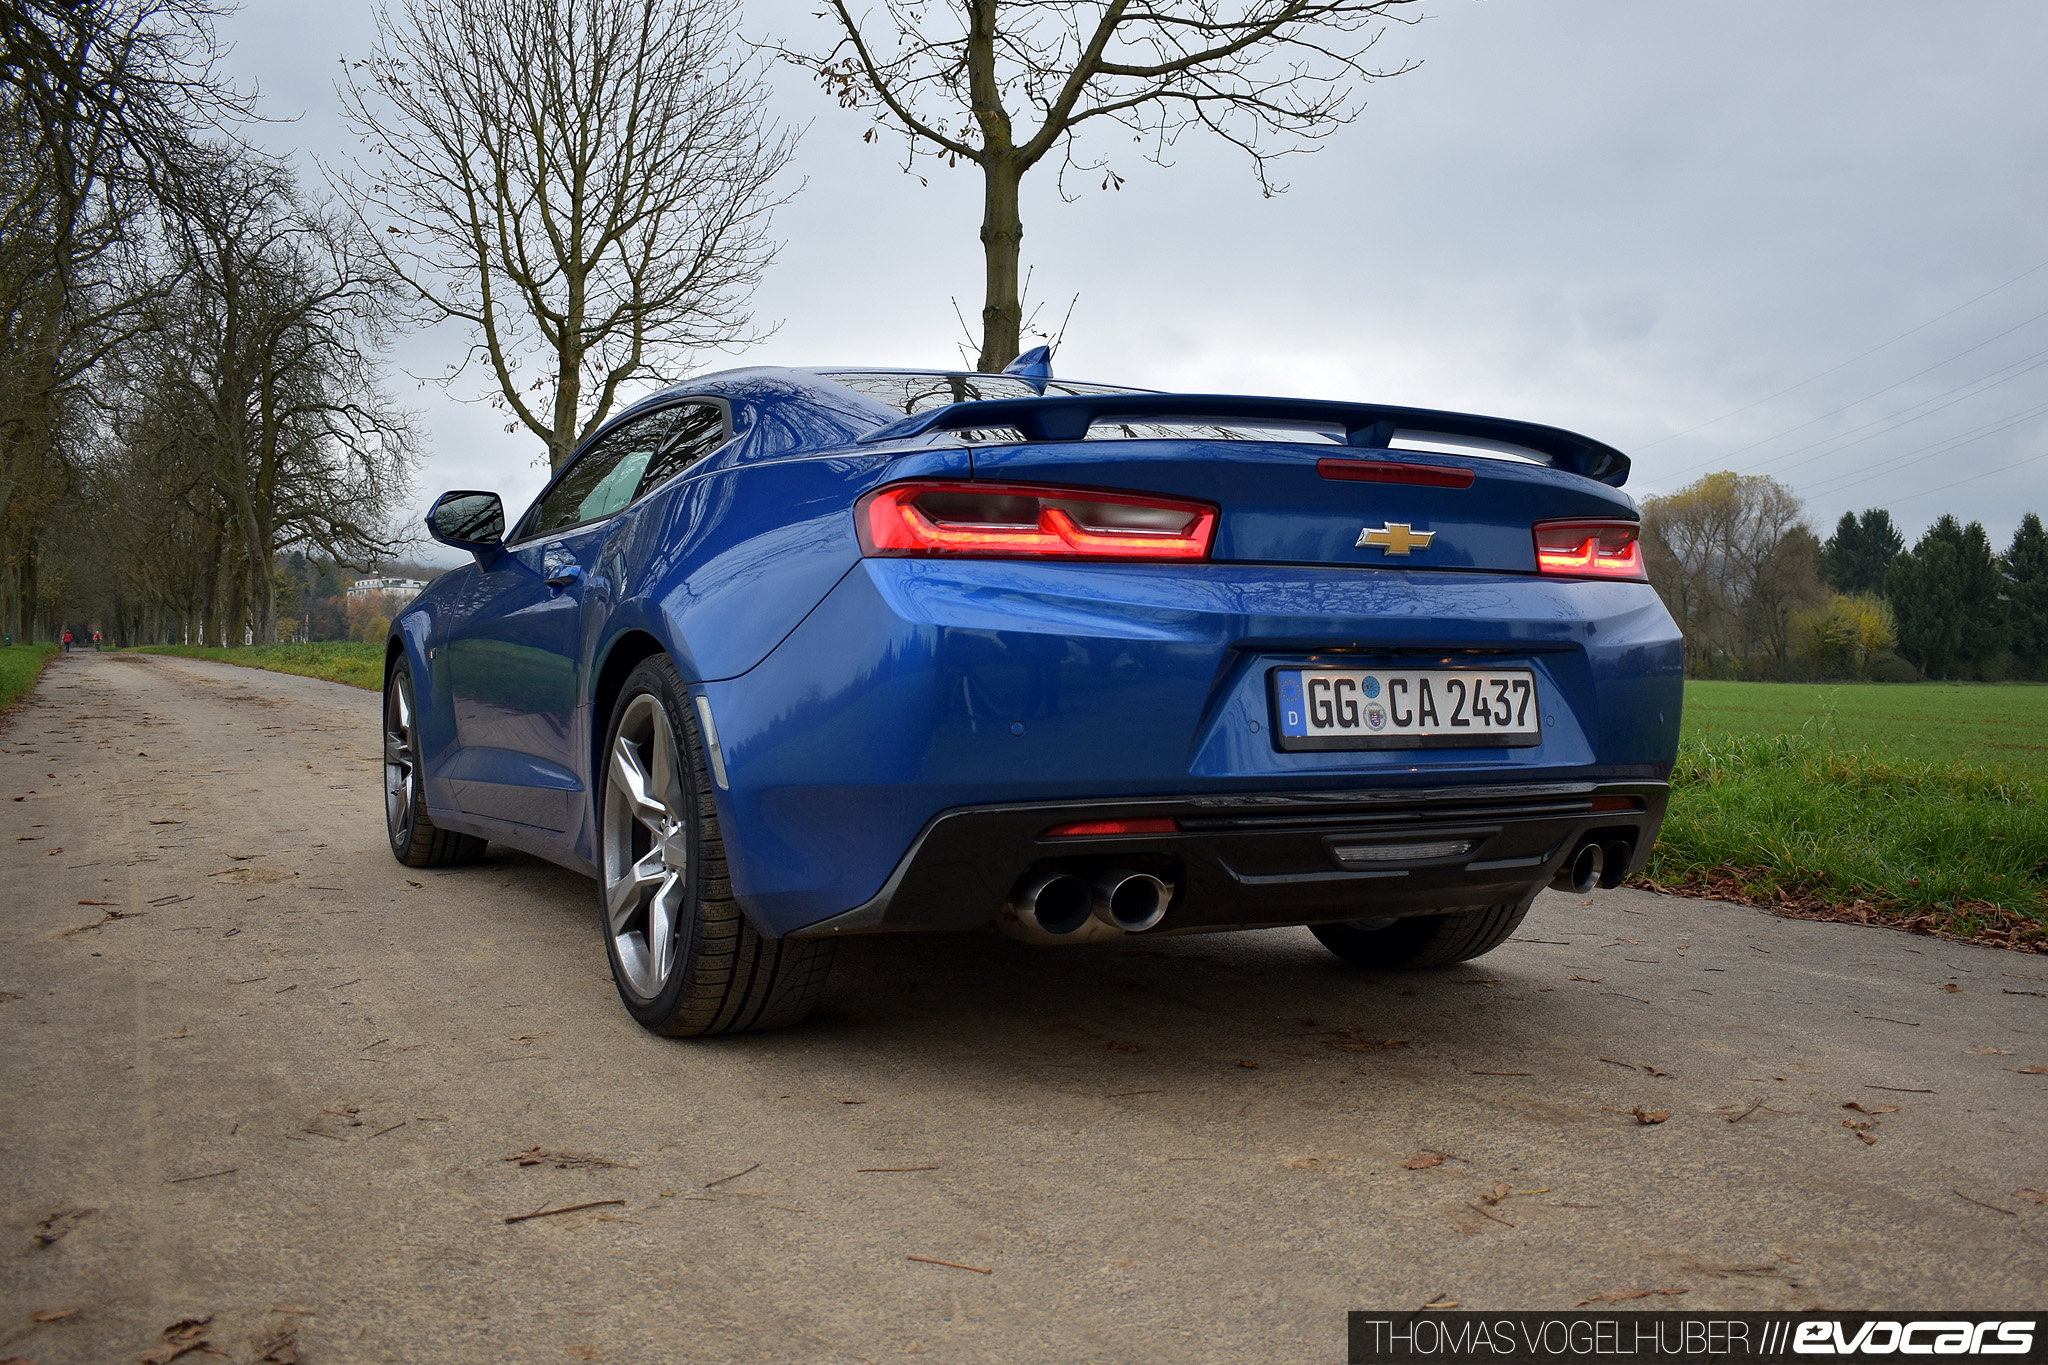 American Muscle At Its Best– der Chevrolet Camaro 6.2